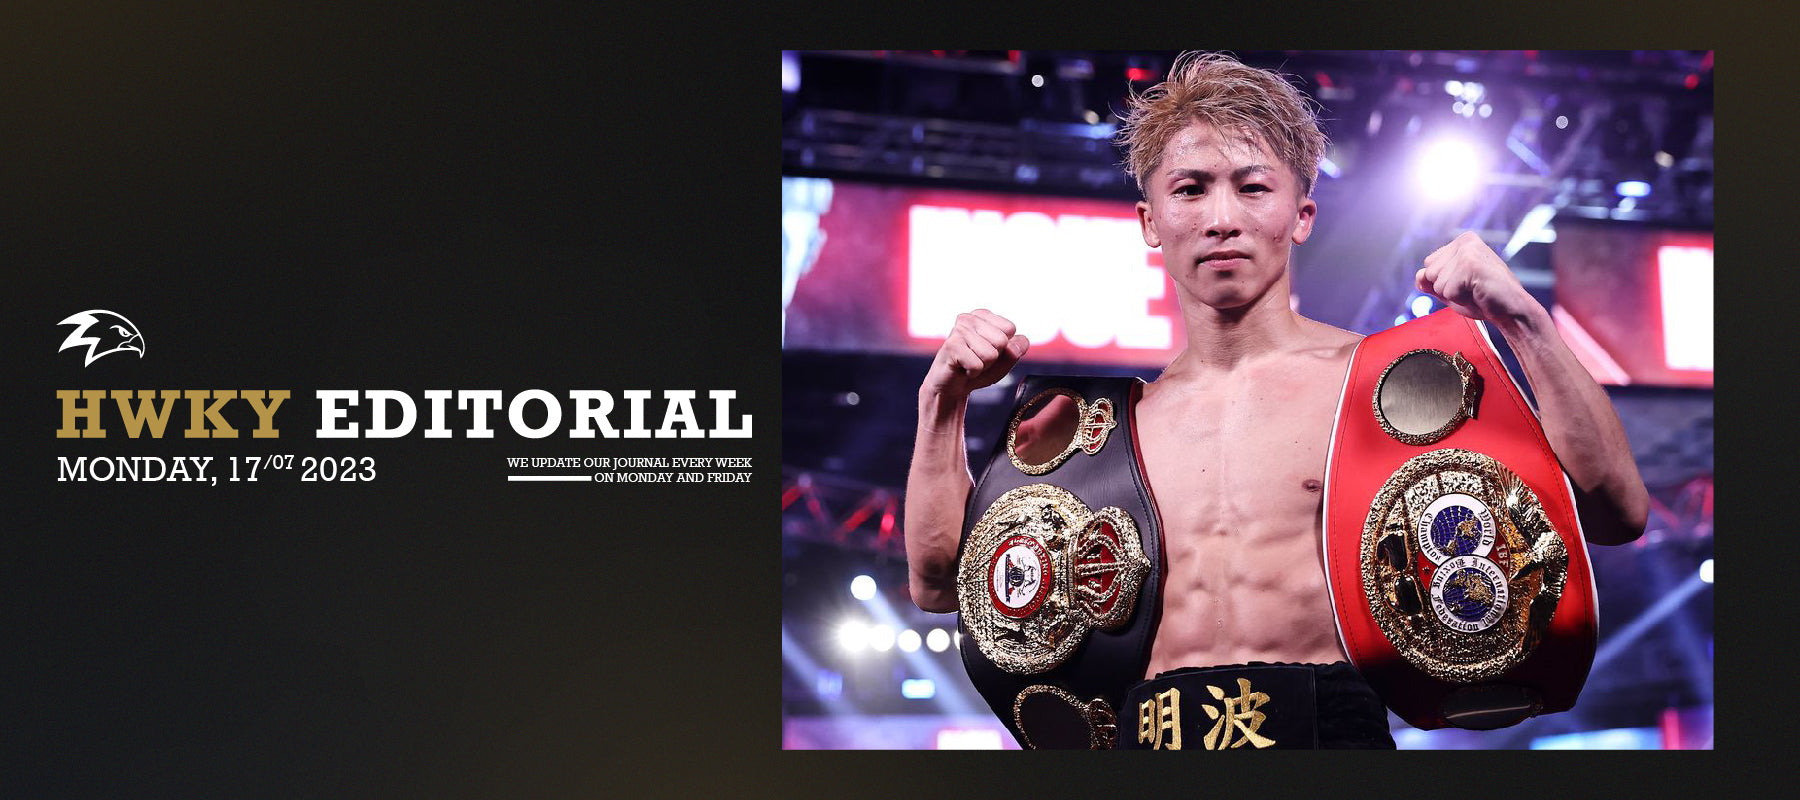 Naoya Inoue: The Star of Japanese Boxing Today